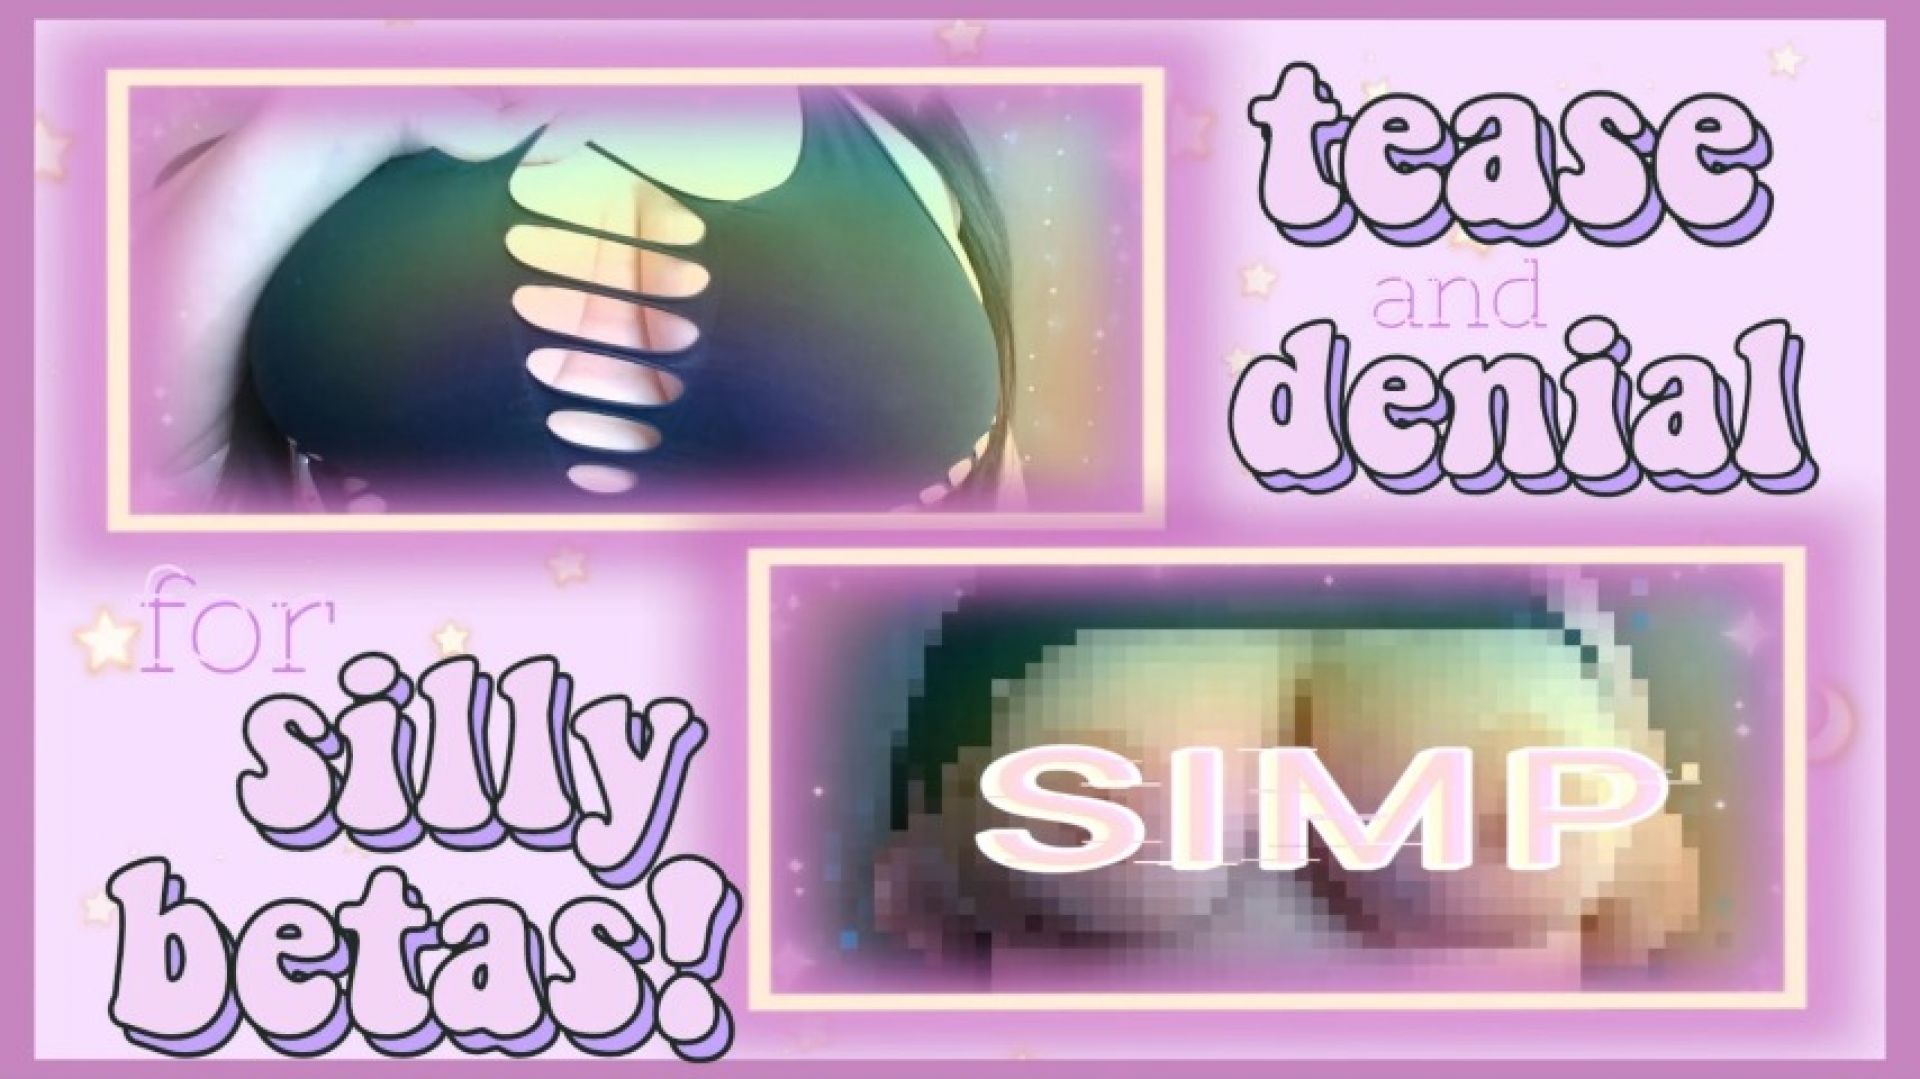 leaked tease and denial for silly betas thumbnail